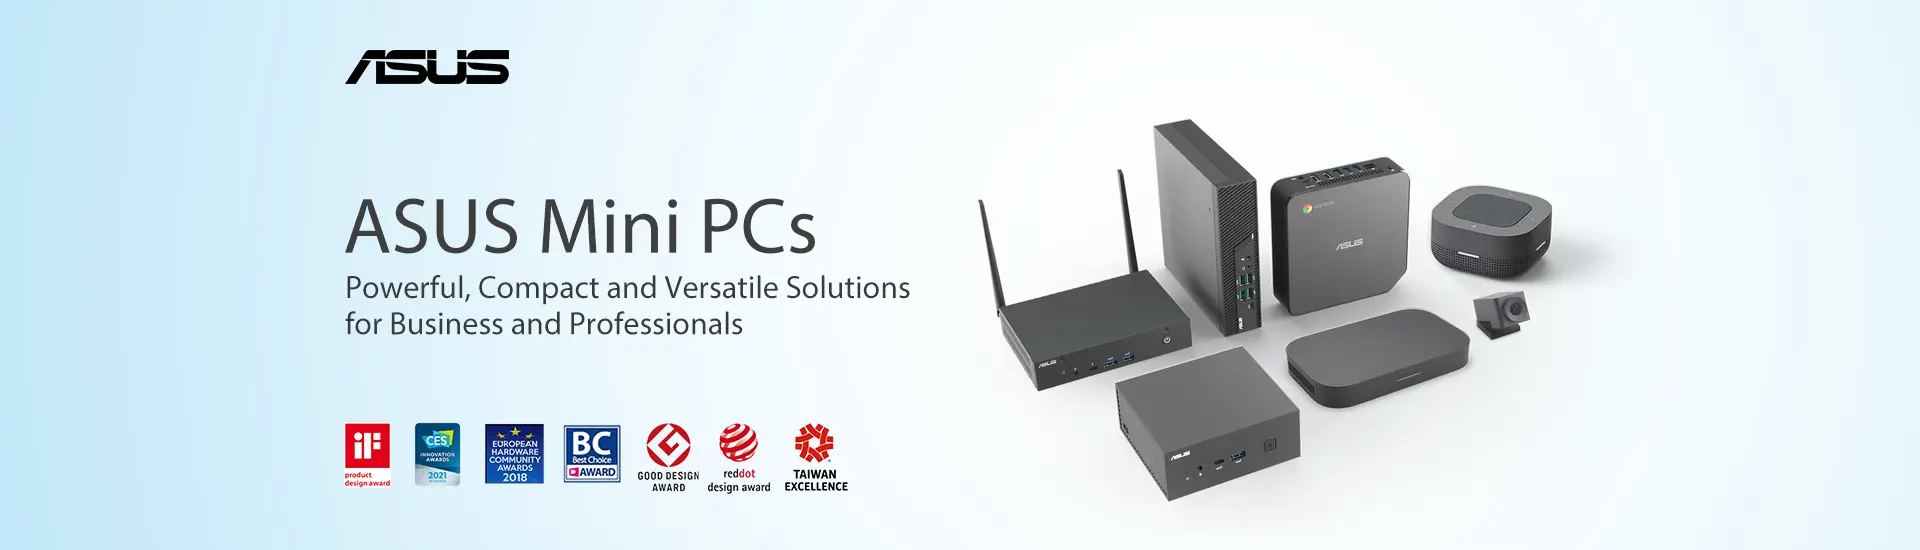 ASUS Mini PCs Powerful, Compact and Versatile Solutions for Business and Professionals